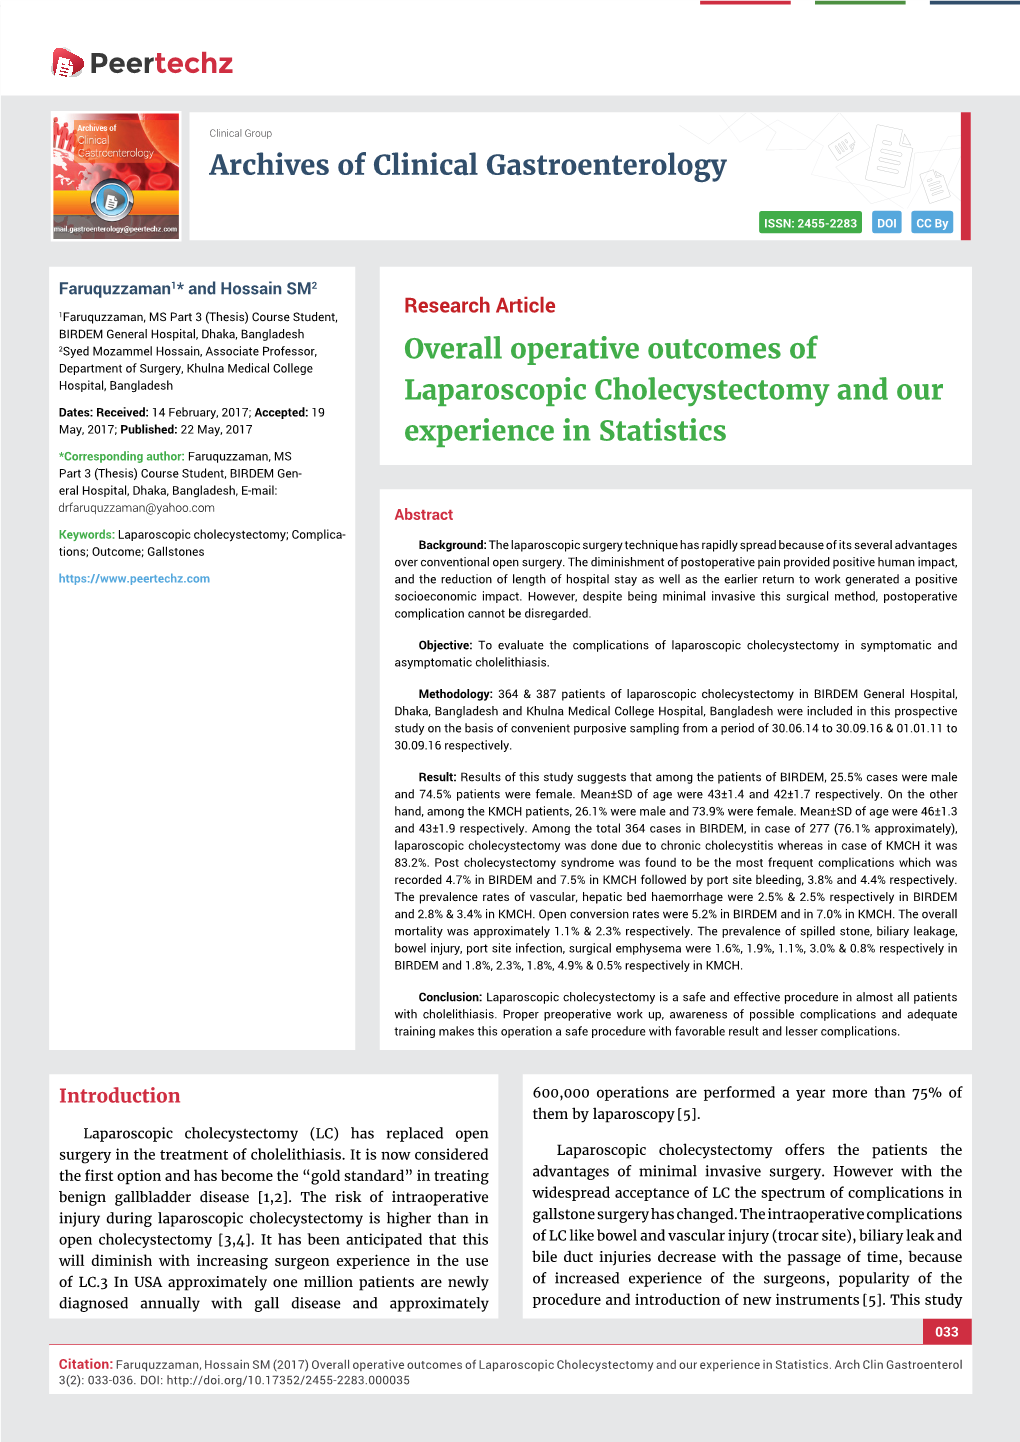 Overall Operative Outcomes of Laparoscopic Cholecystectomy and Our Experience in Statistics